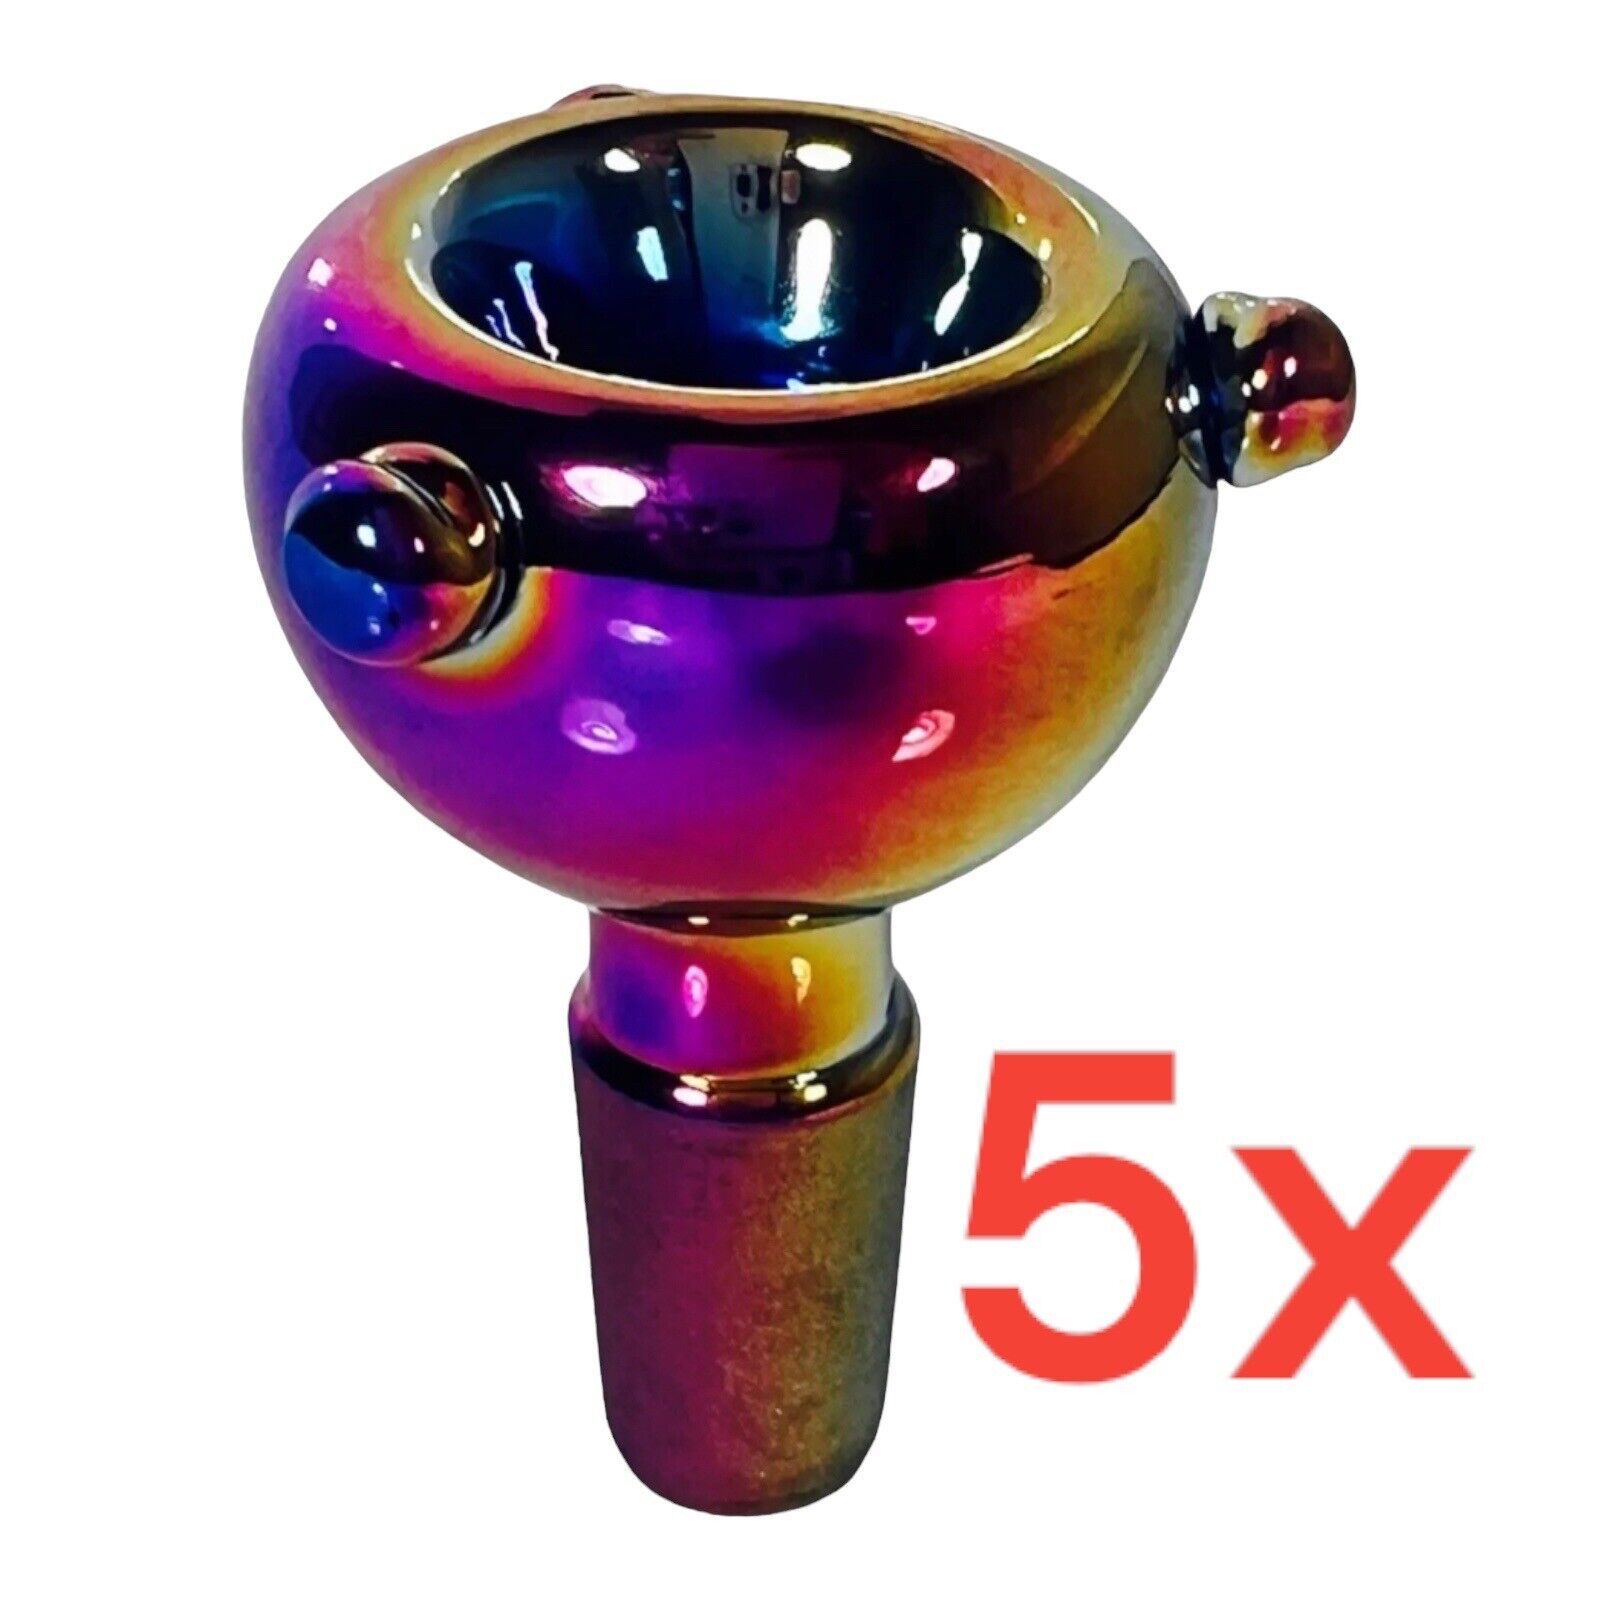 5x Pcs Rainbow 14mm Male Bowl Thick Glass Water Pipe Hookah Bong Tobacco Pipe US